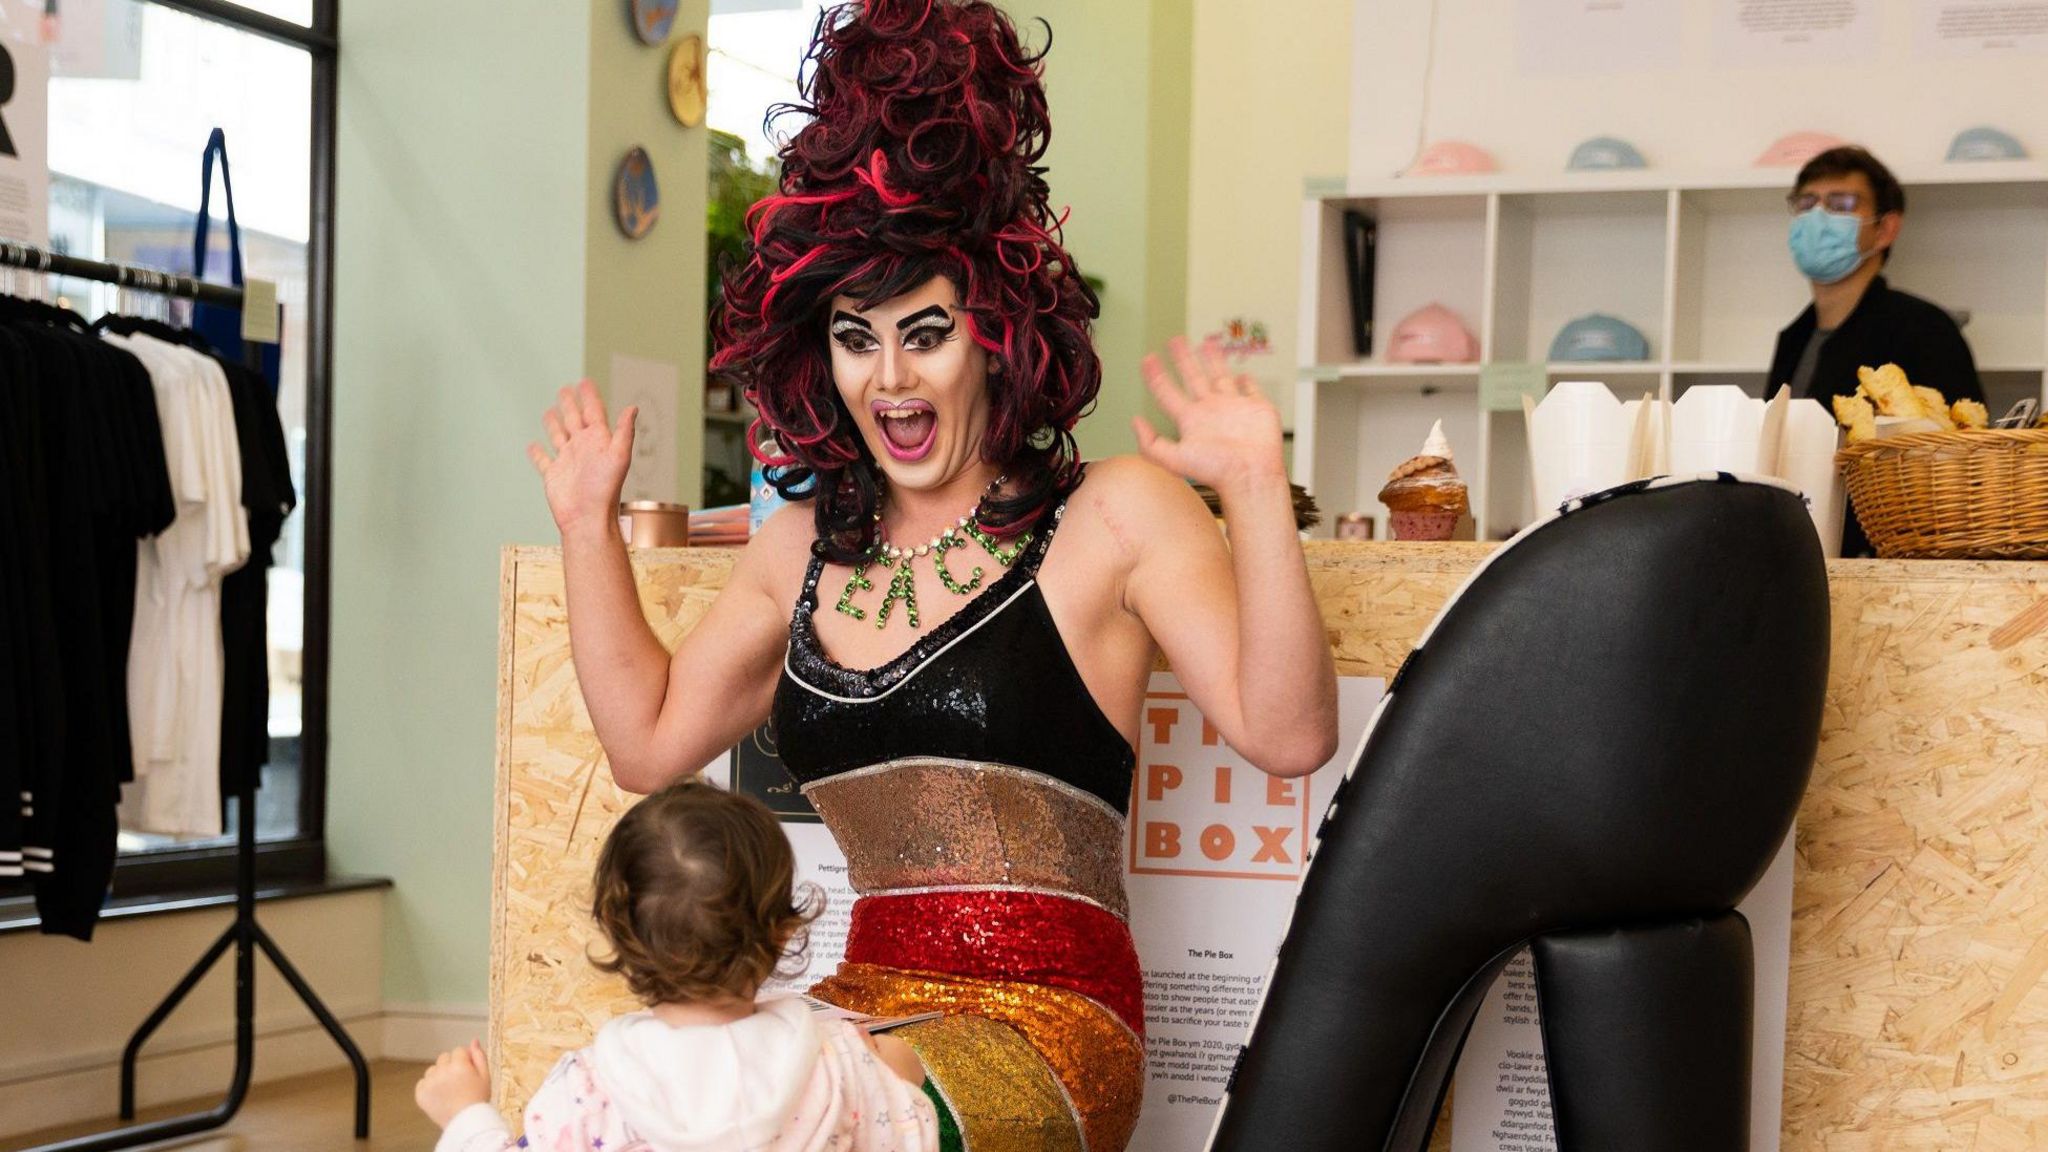 Drag queen smiling at child during show